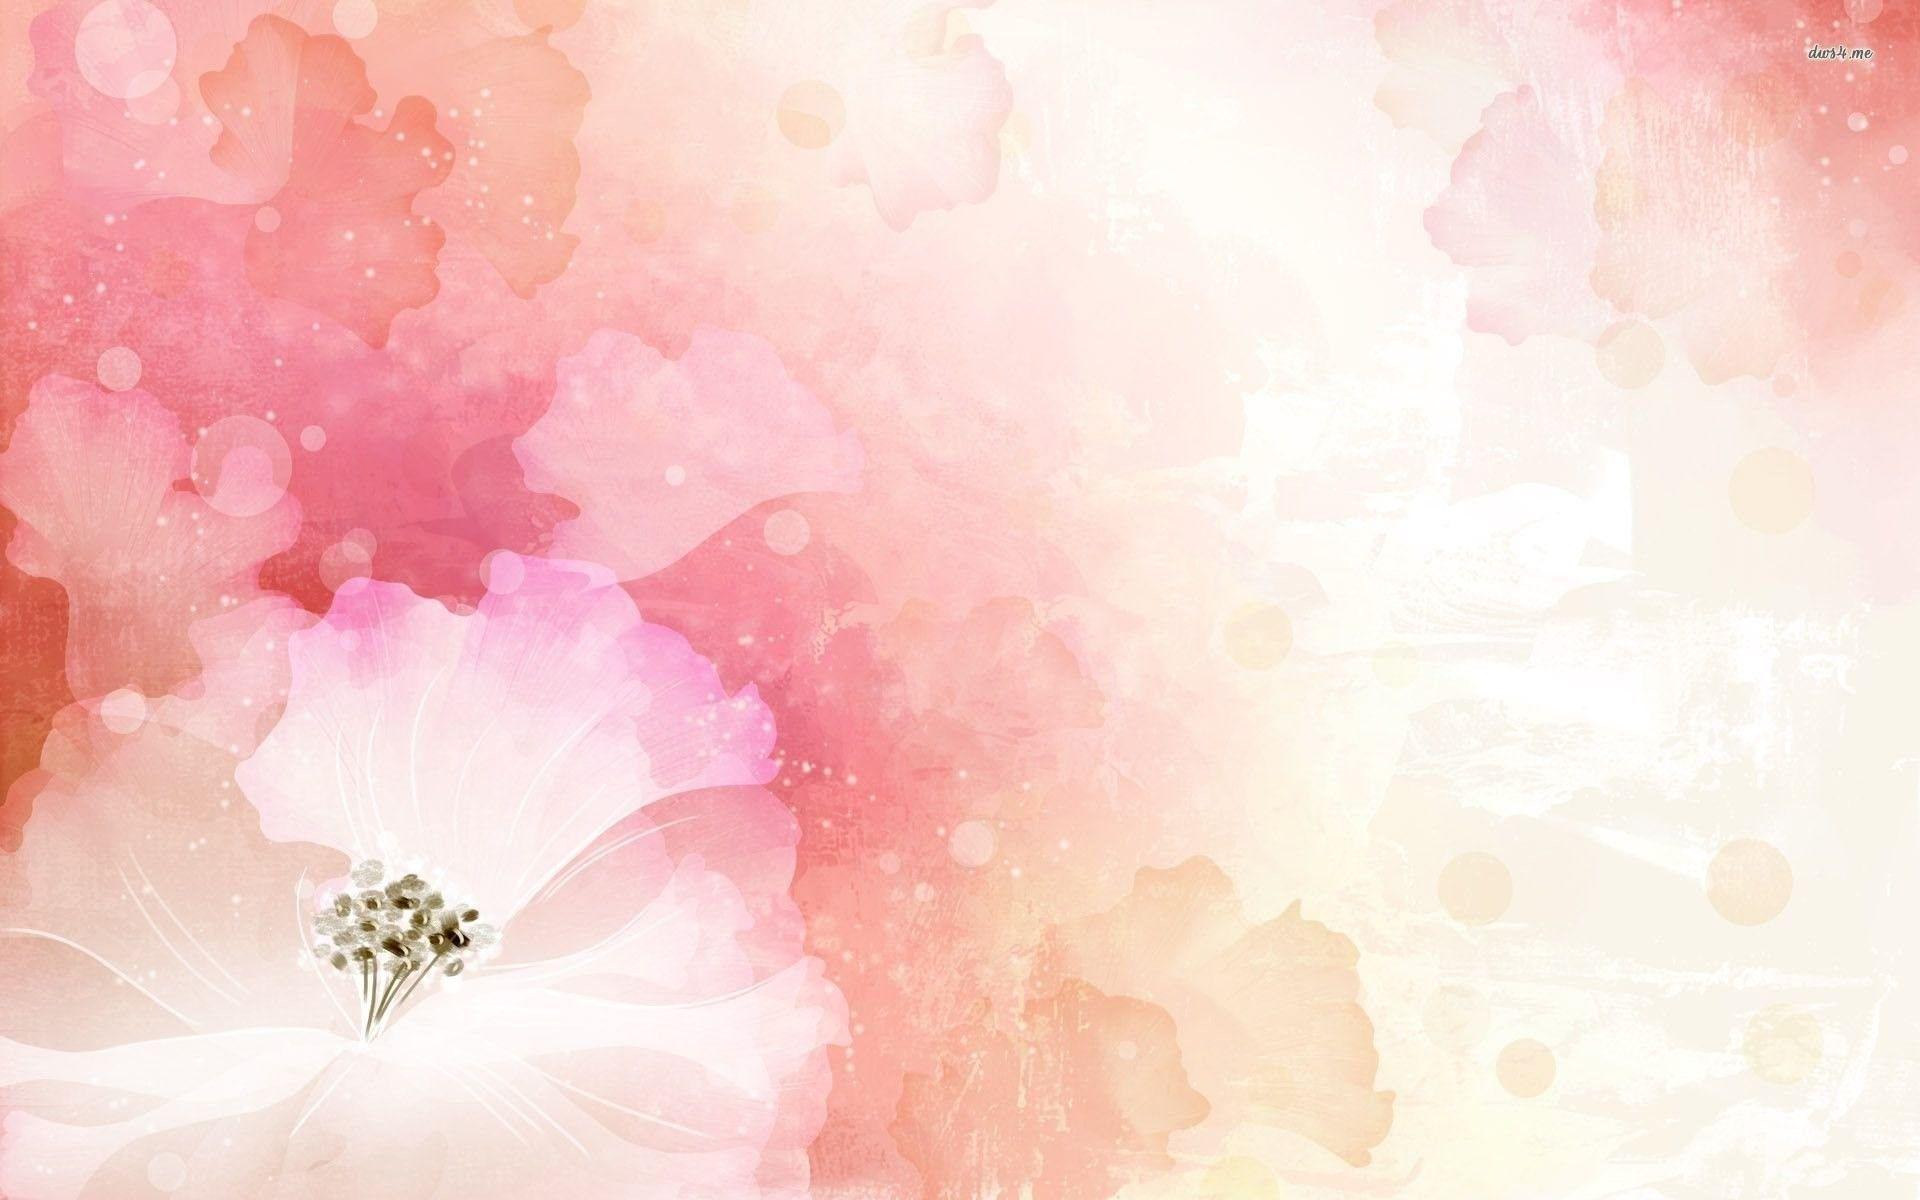 Faded Floral Watercolor Wallpaper 1920x1200